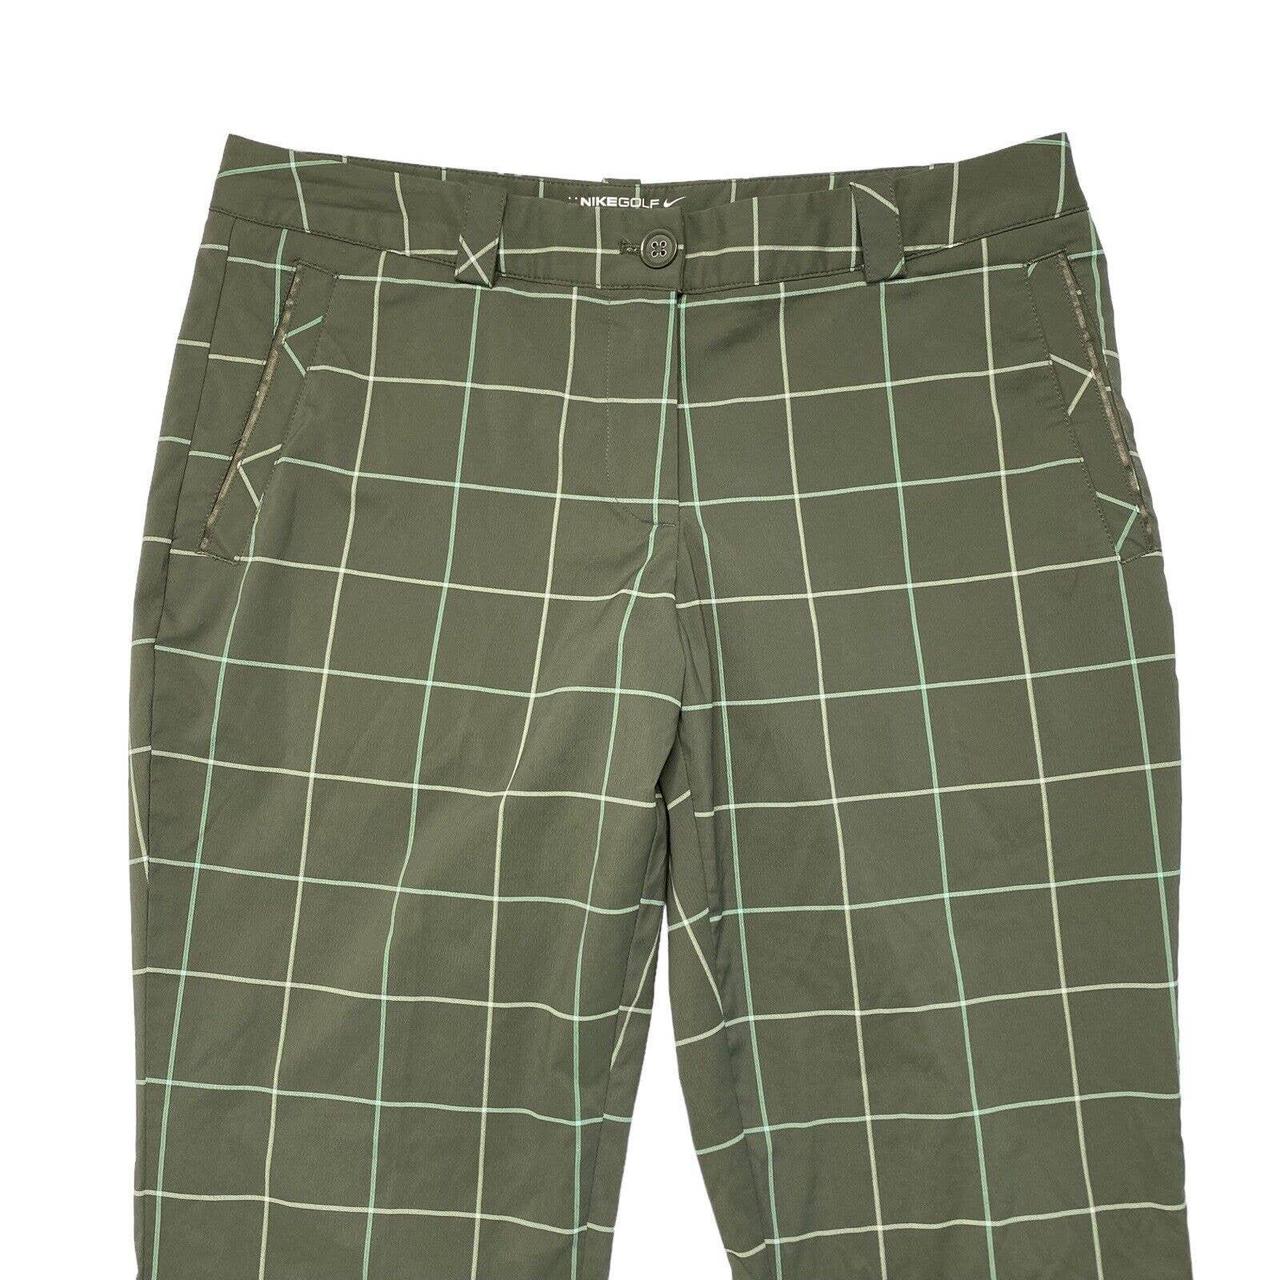 Nike Plaid Chino Shorts | Hats from County Golf | Golf Sale | Golf Clothing  | Discount Golf Clothes